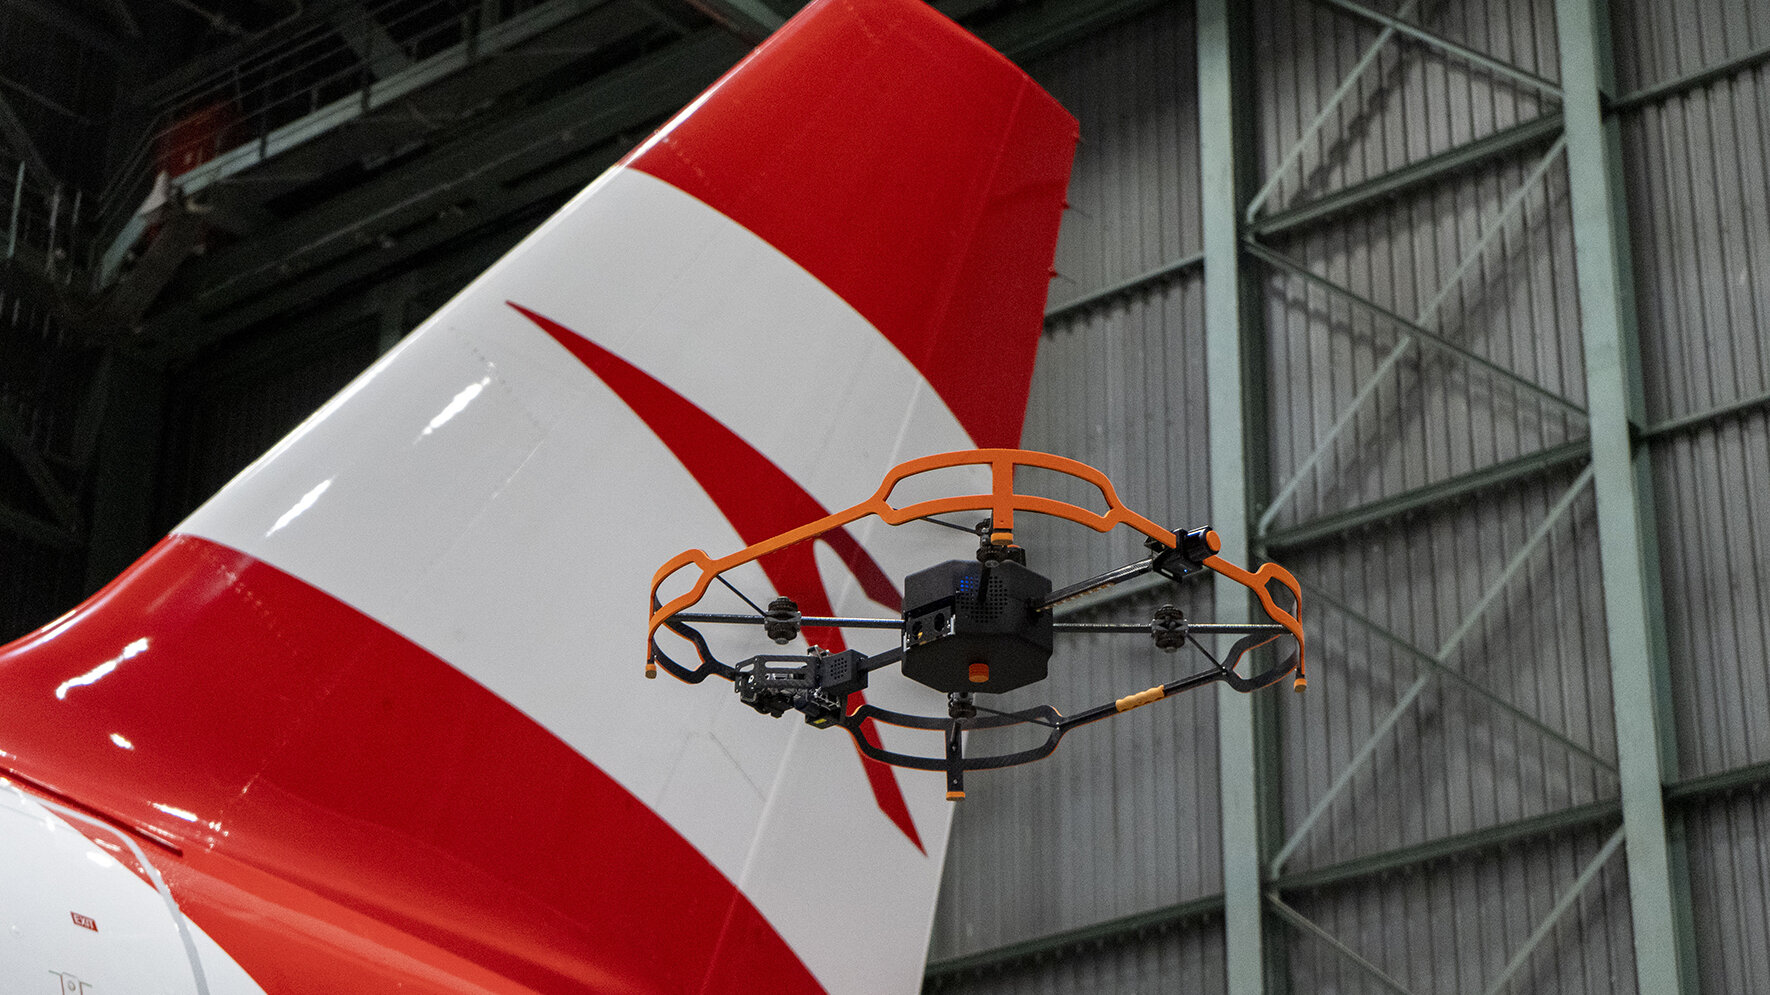 Austrian Airlines Relies on Drone Technology for Aircraft Inspections - Lufthansa Group